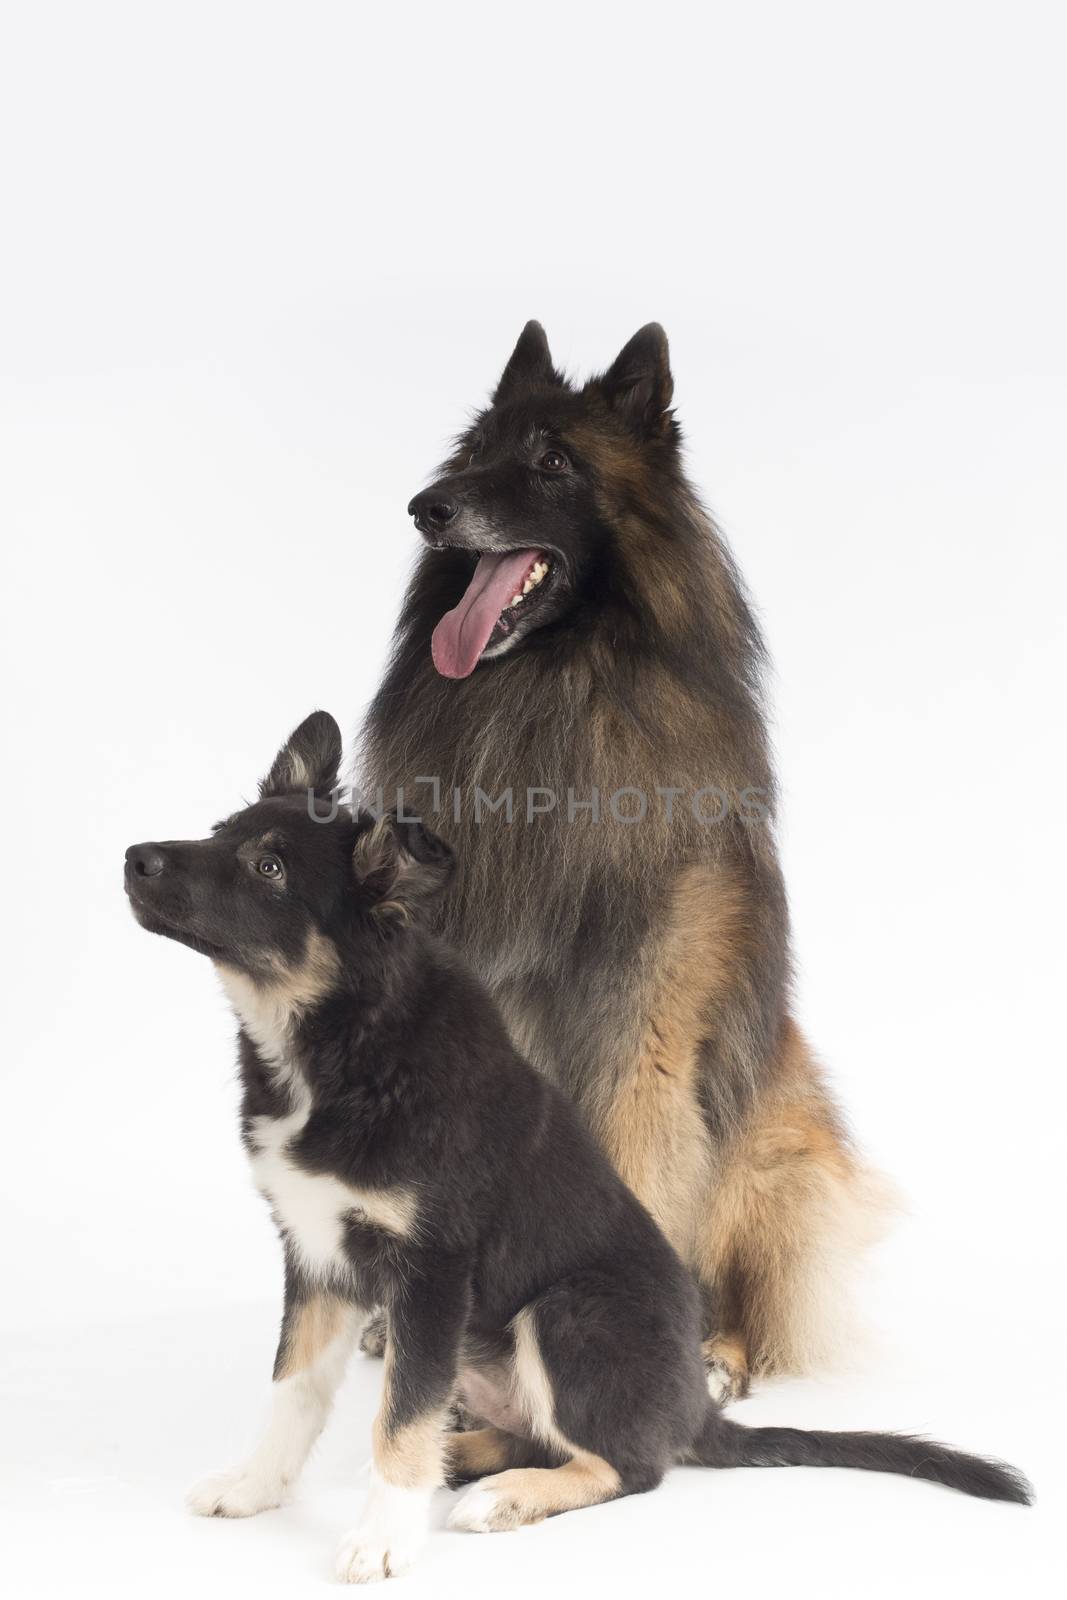 Two dogs, puppy and adult, sitting on white studio background by avanheertum